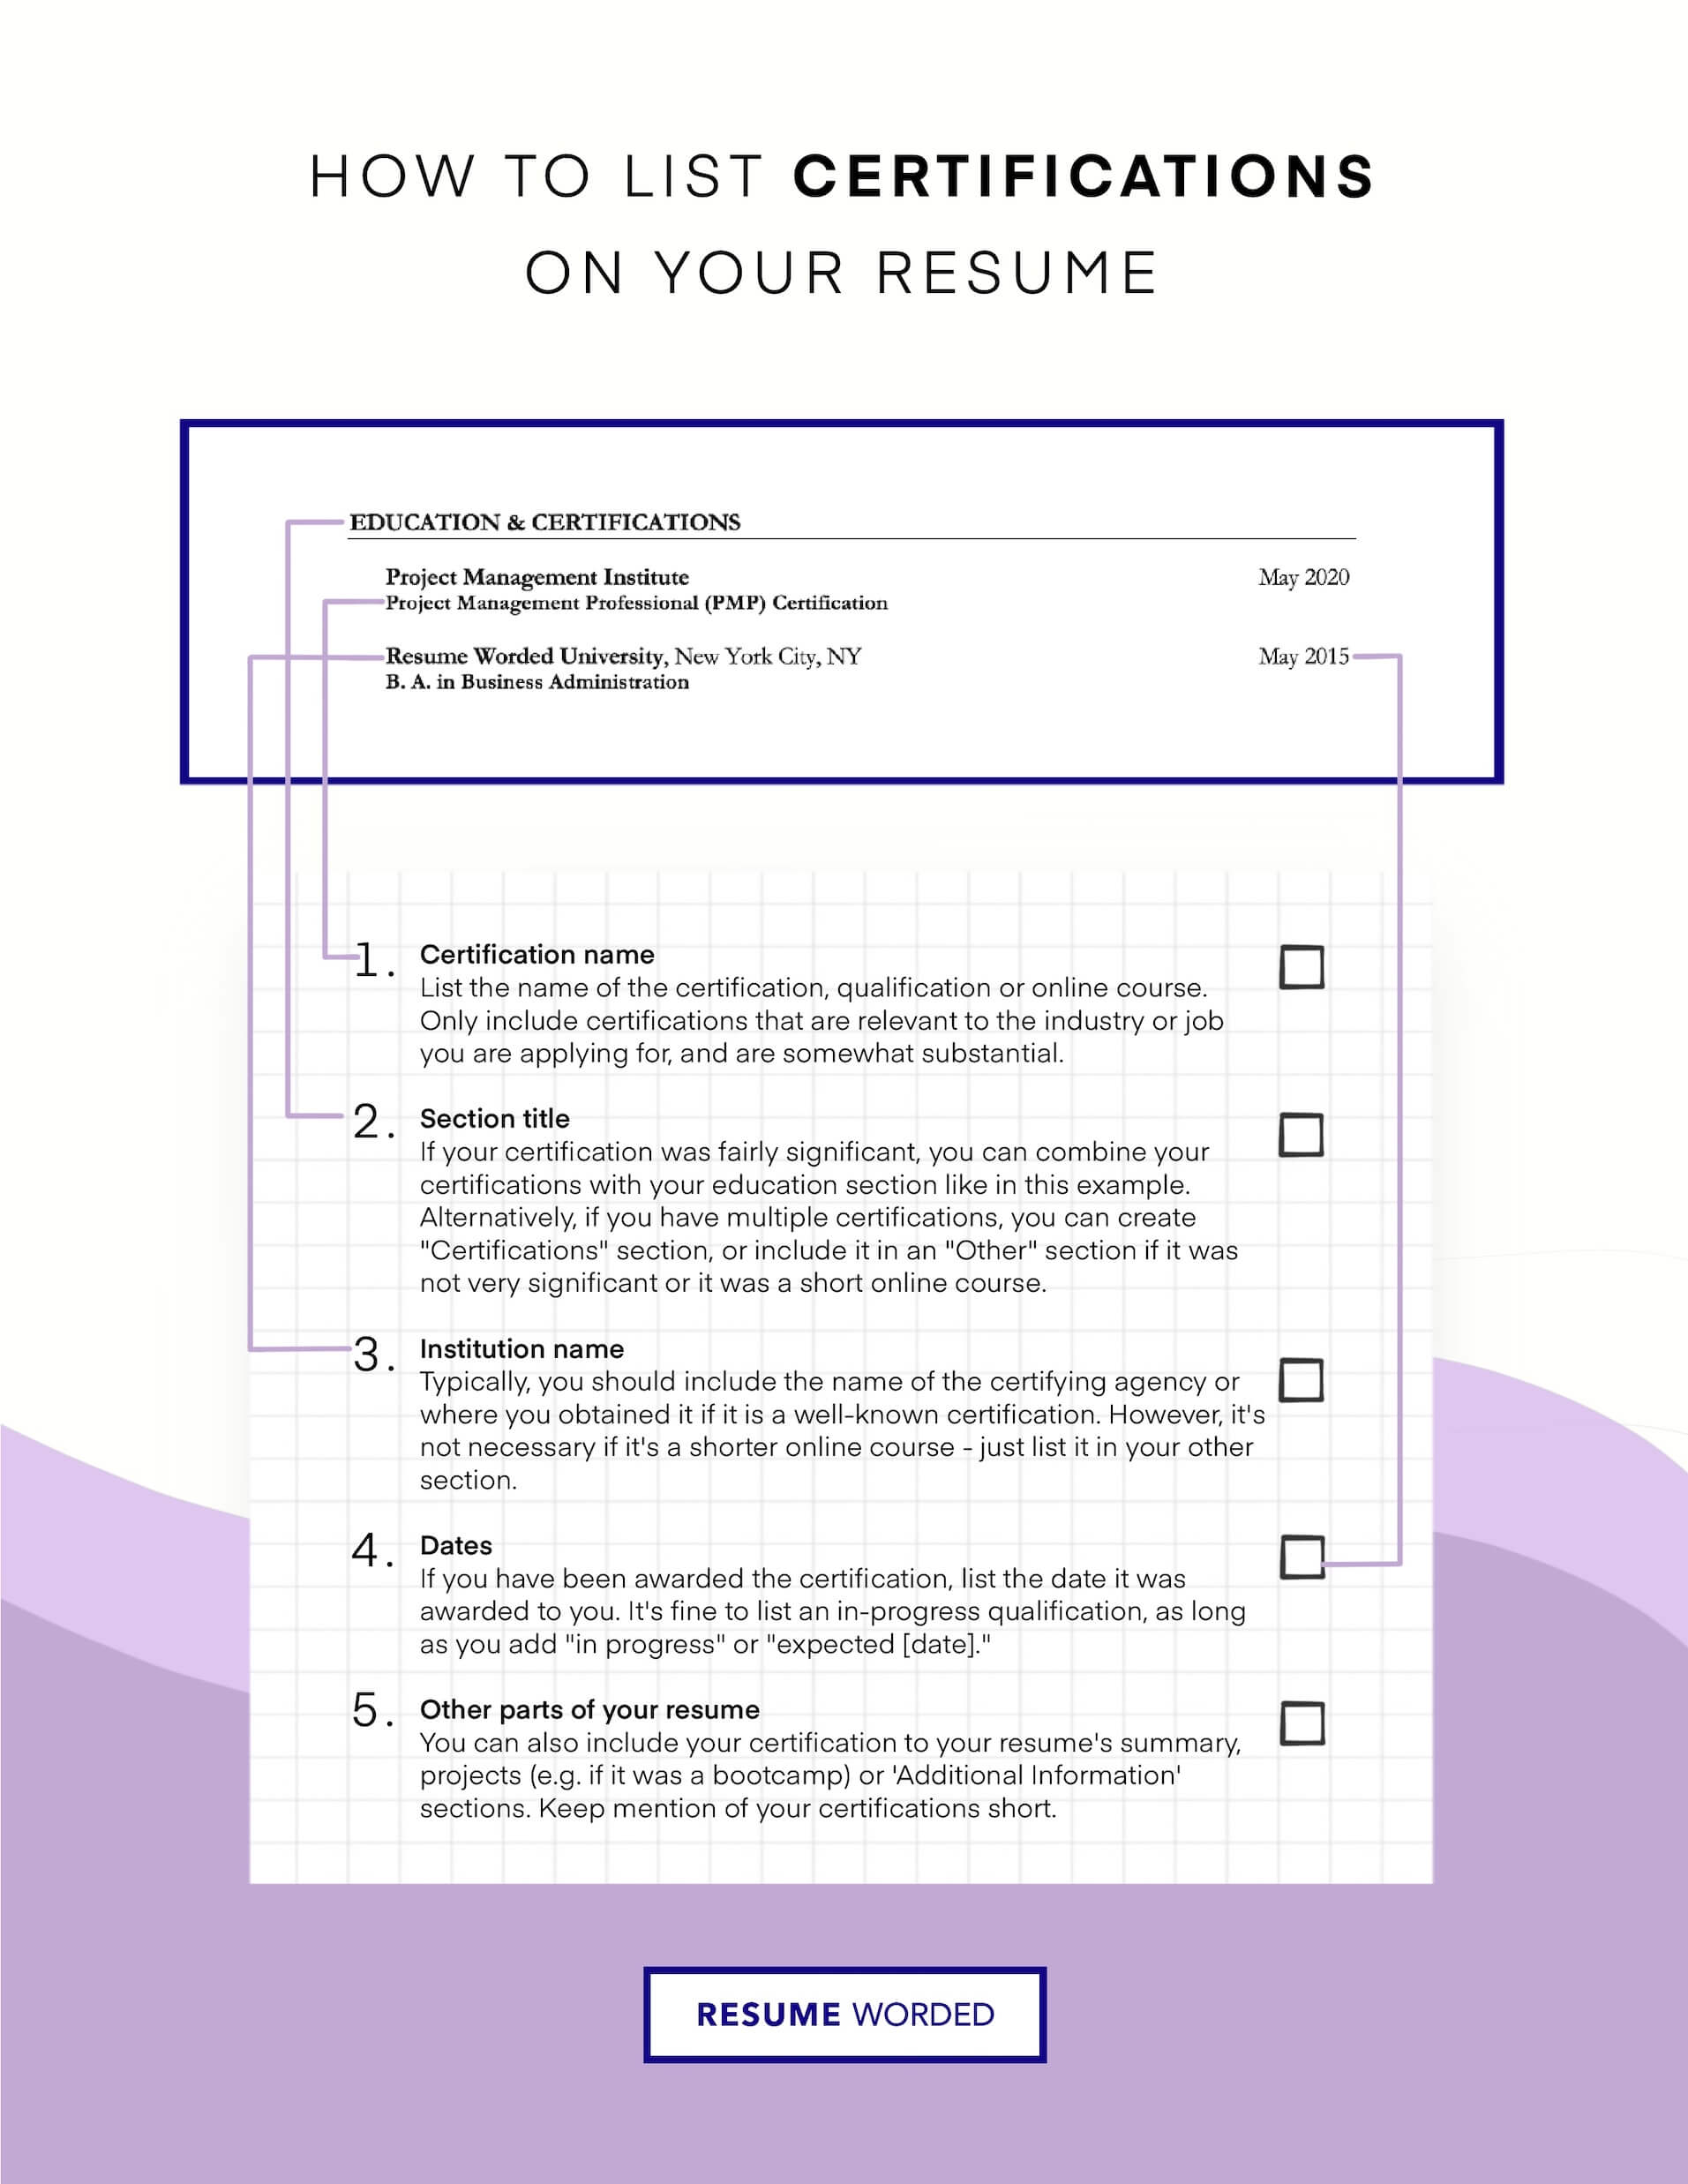 Include any relevant certification in your resume. - Salesforce Administrator  Resume